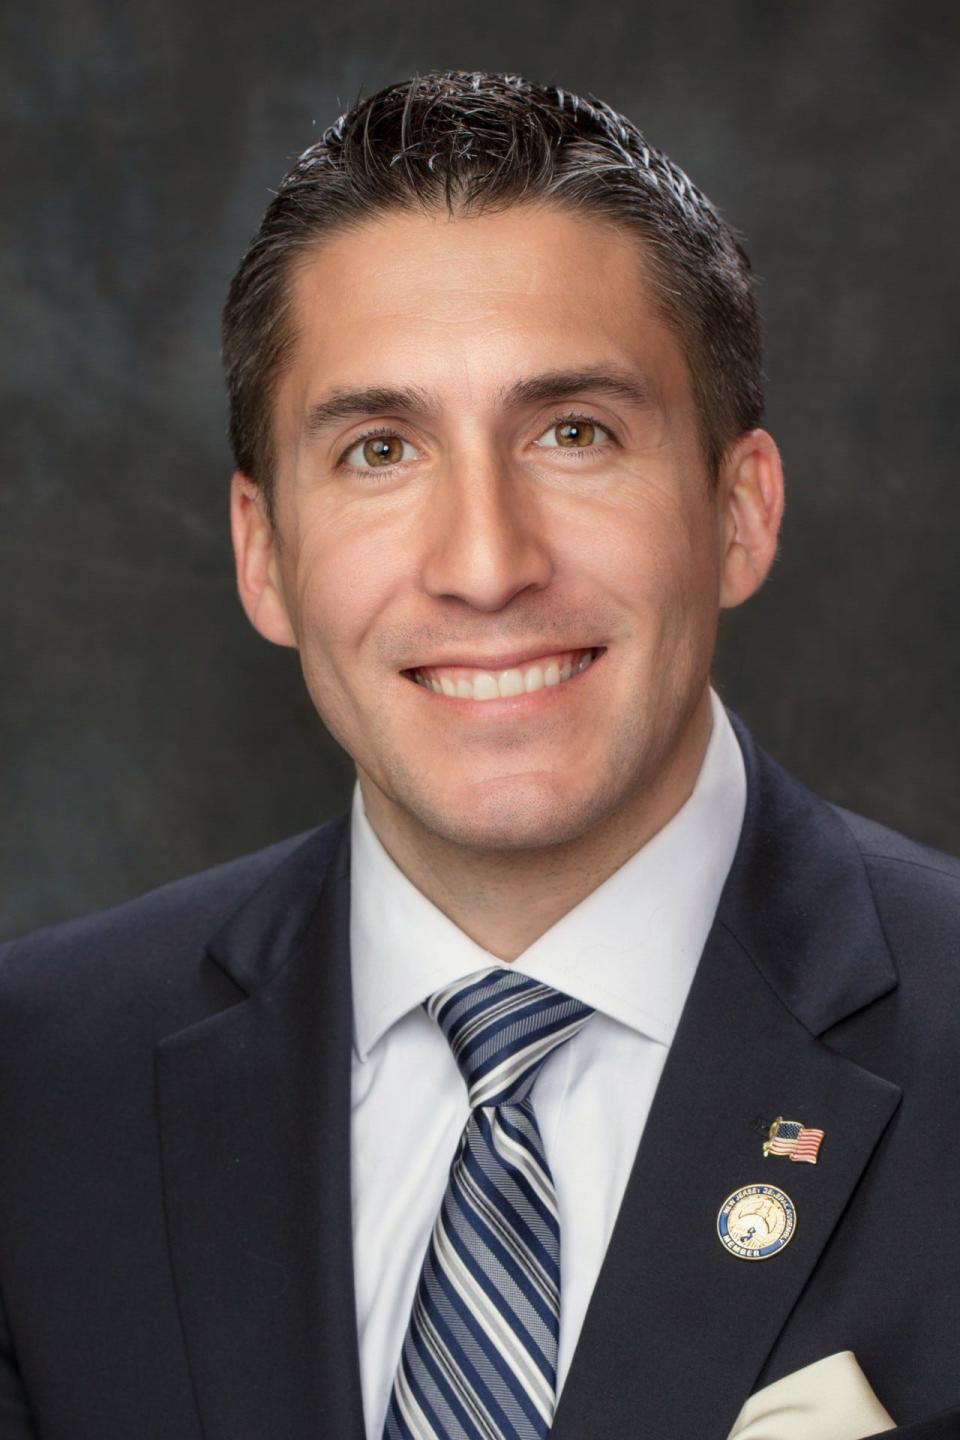 Ryan Peters previously served as an assemblyman representing the 8th Legislative District of New Jersey, covering towns in Burlington, Camden and Atlantic counties. He is also a former member of the Burlington County Board of Chosen Freeholders and an attorney at Pepper Hamilton LLP.